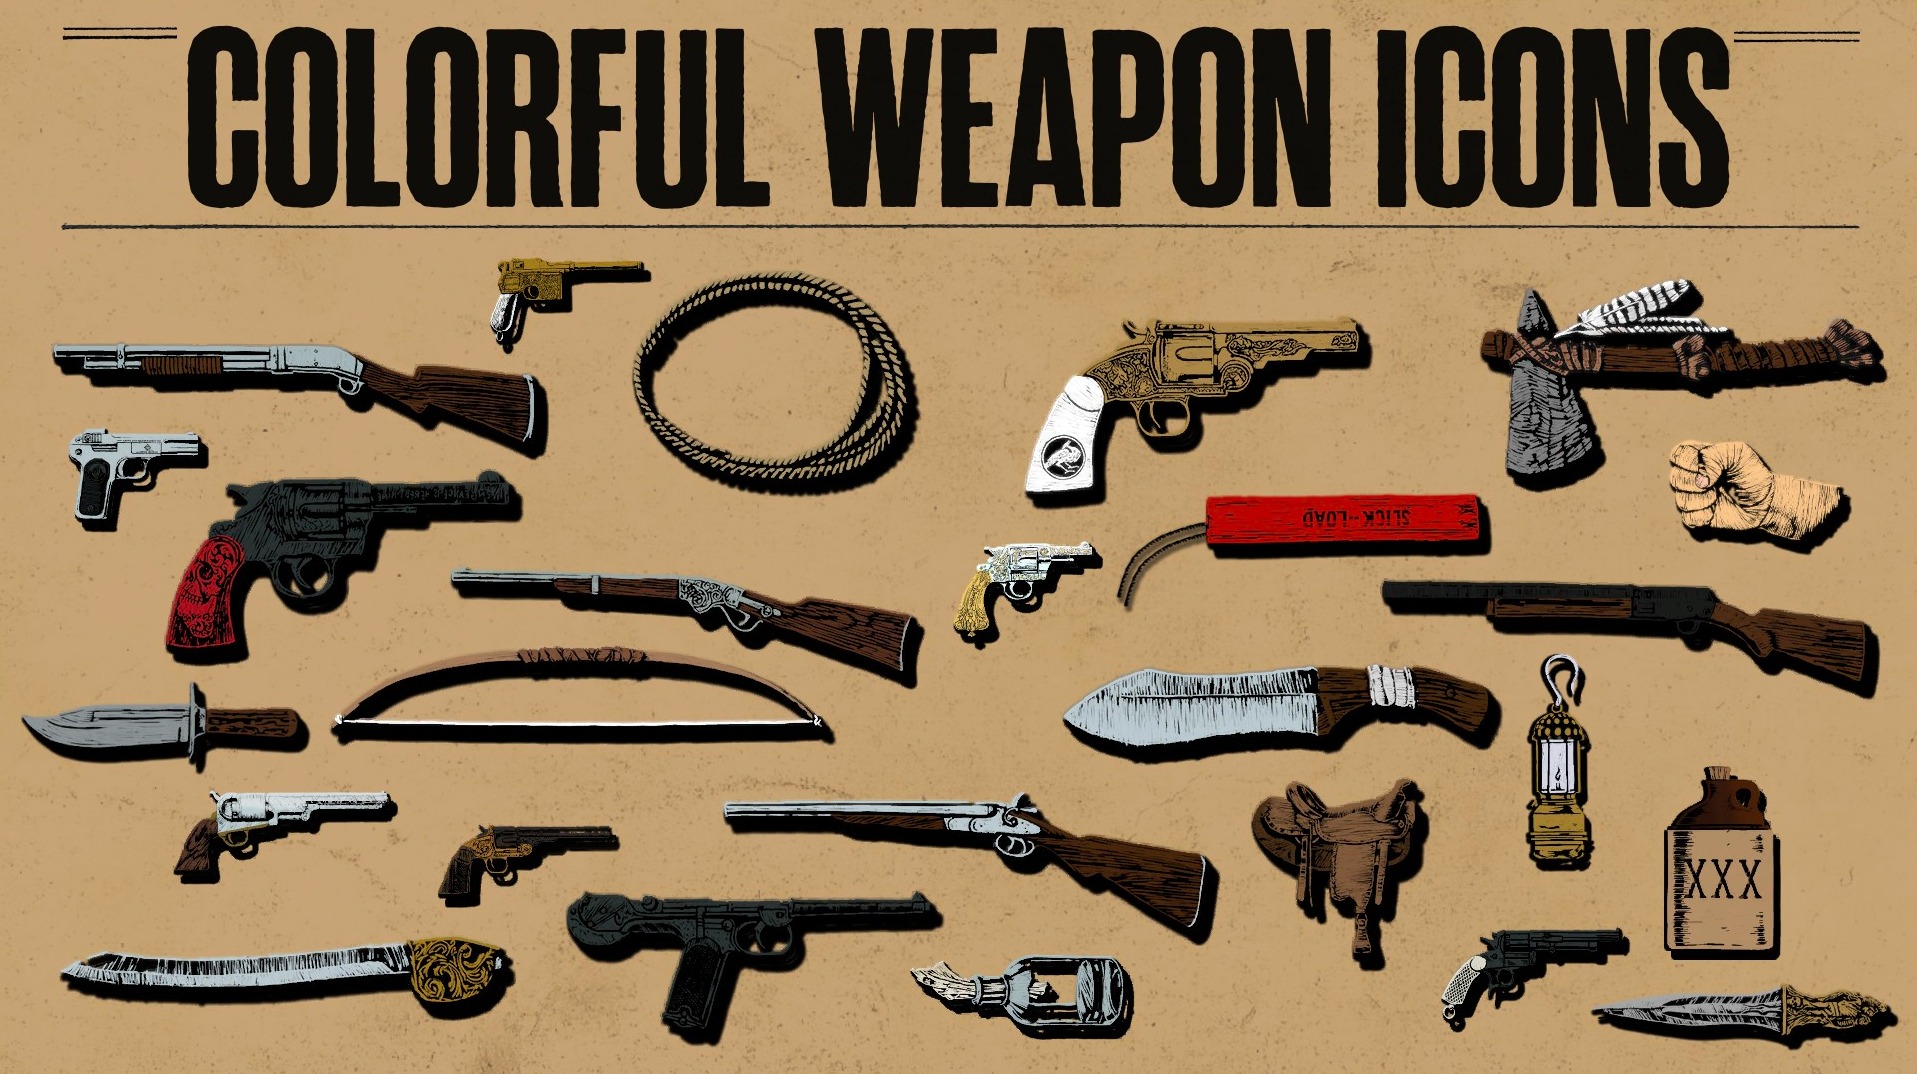 RDR2 - Colorful Weapon Icons